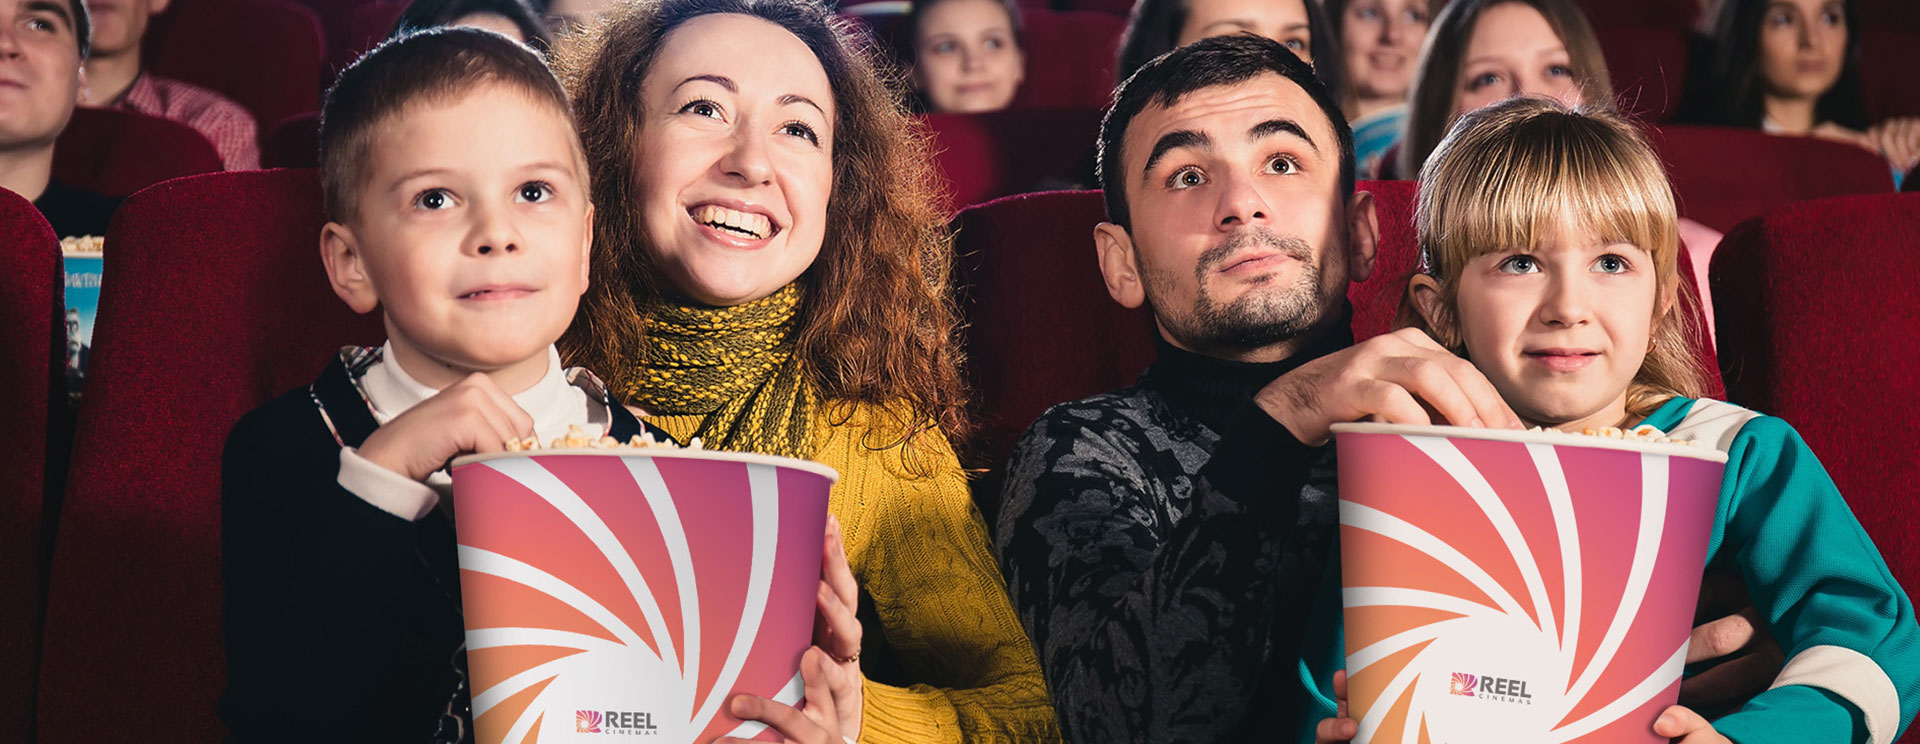 Reel Unlimited Movie Pass